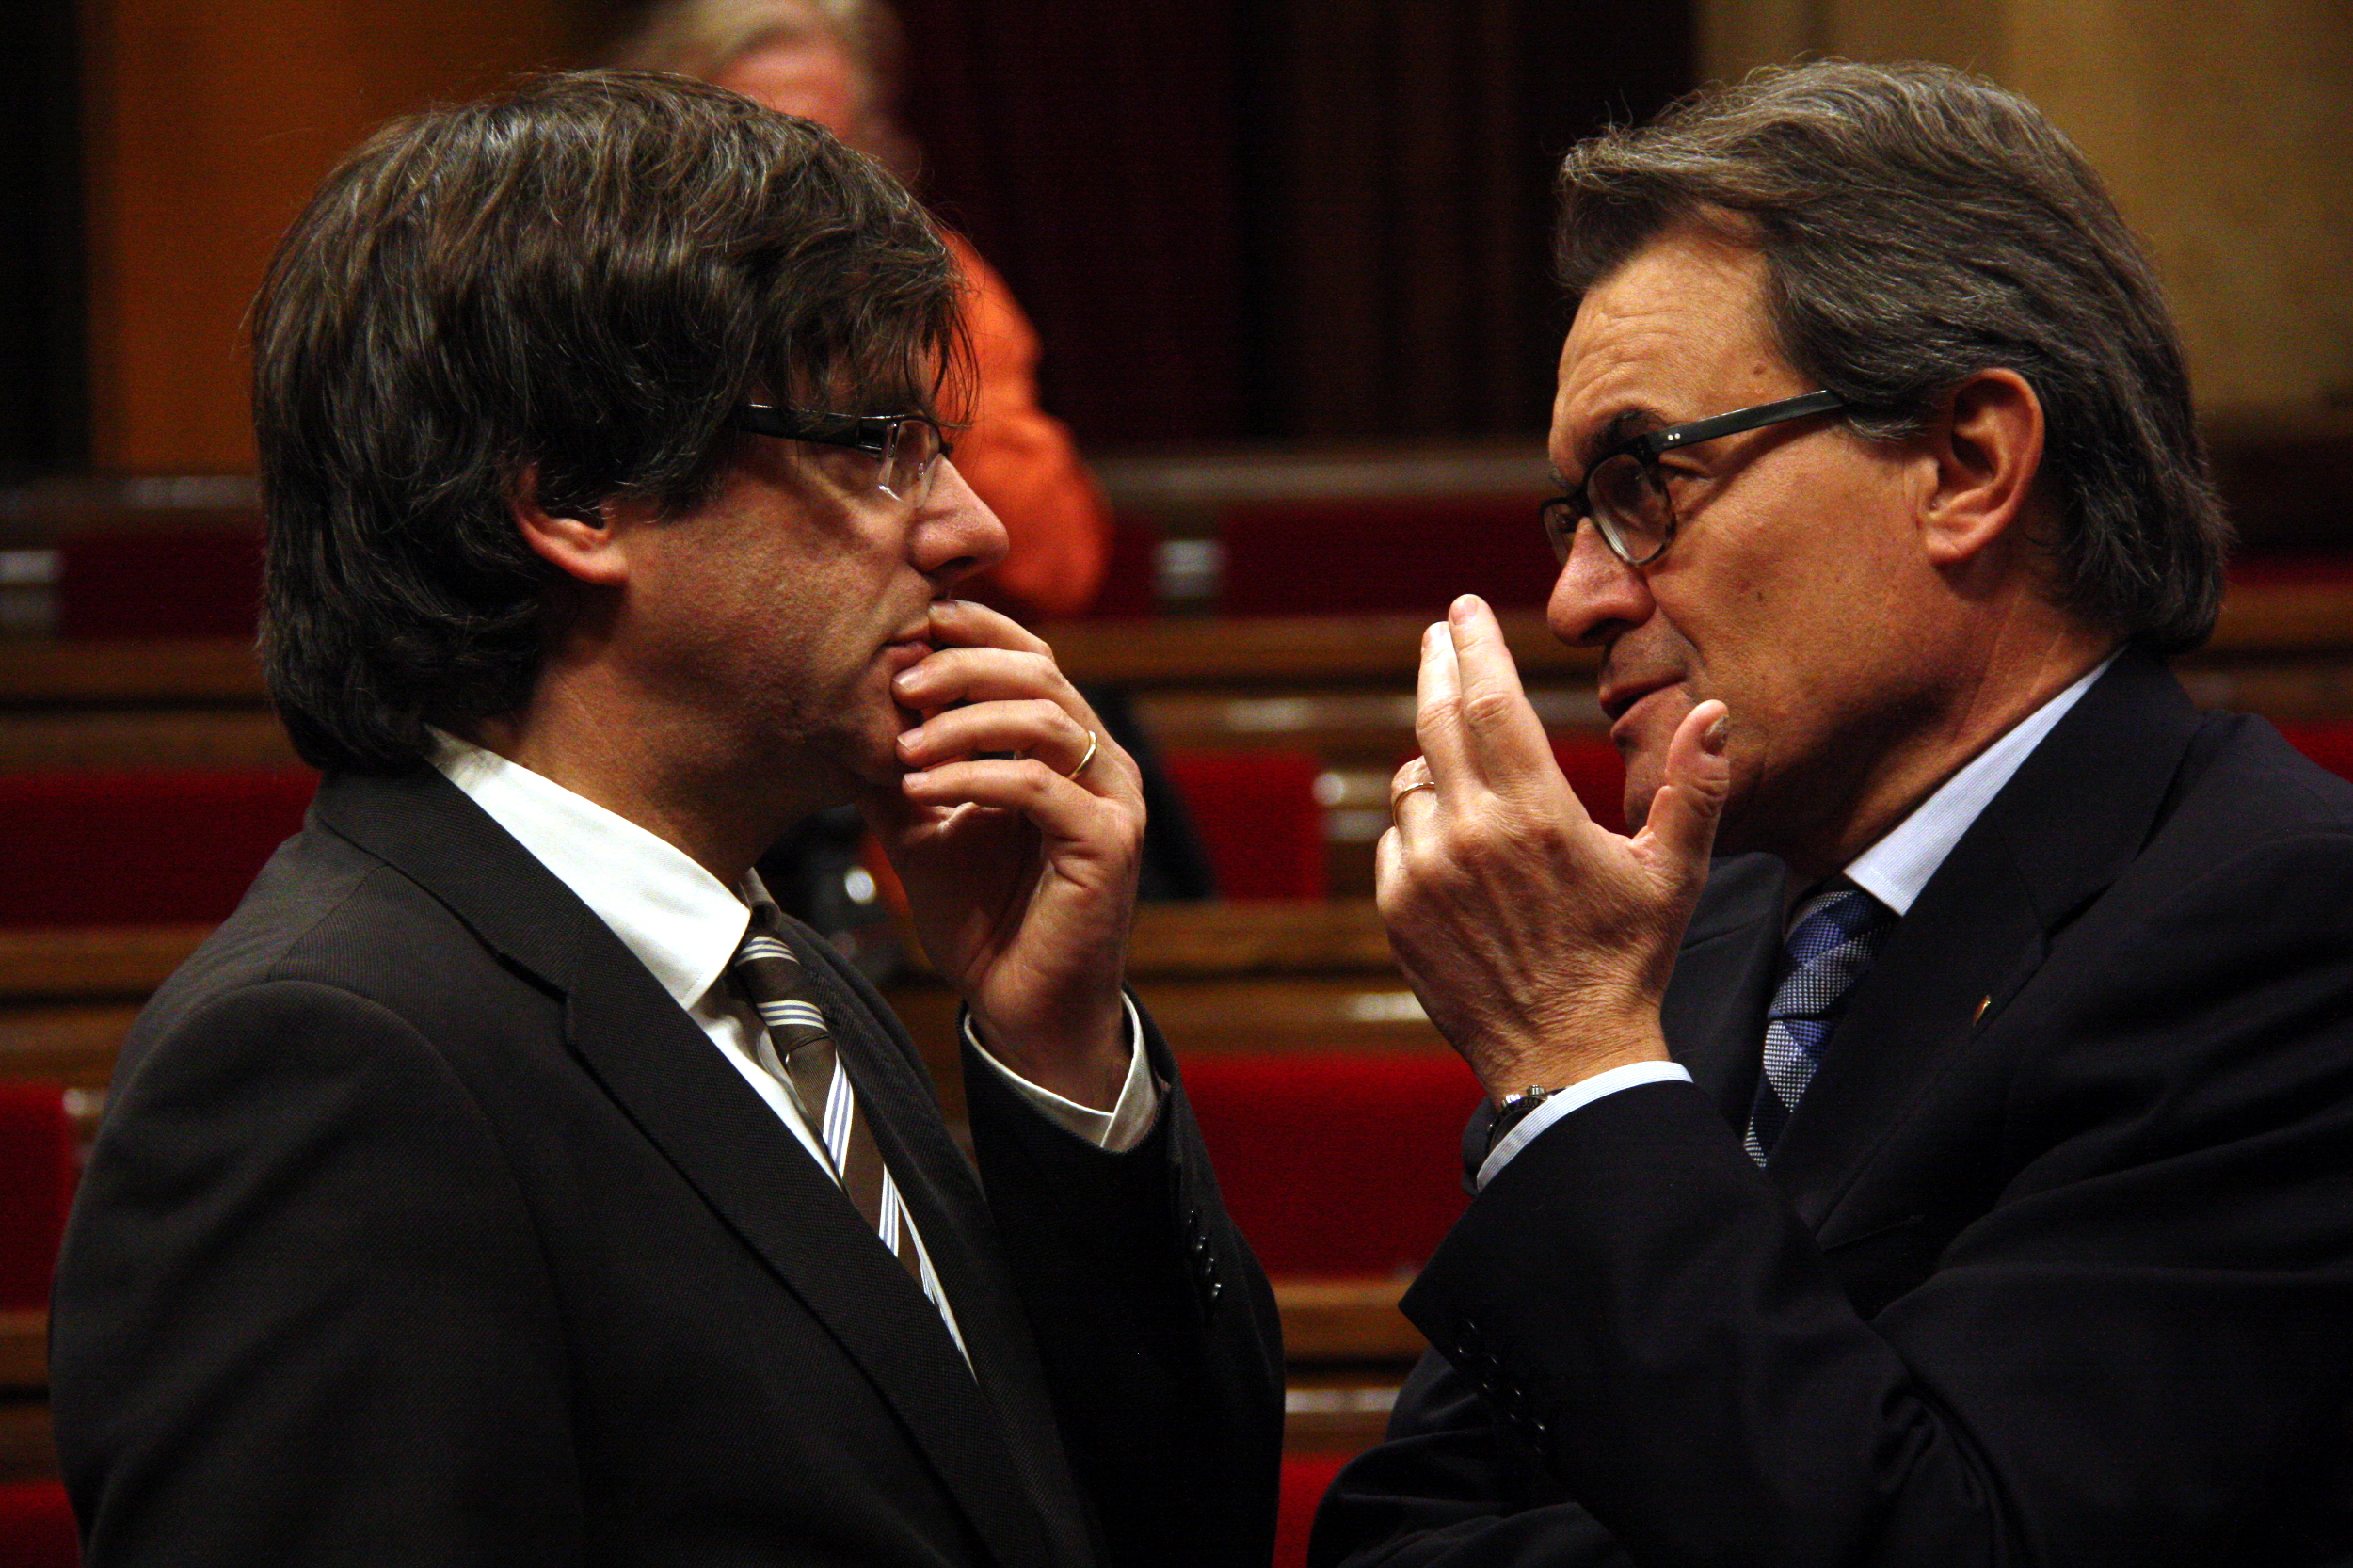 Current Catalan President, Artur Mas and recently invested as new Catalan President, Carles Puigdemont talking at the end of the investiture debate (by ACN)